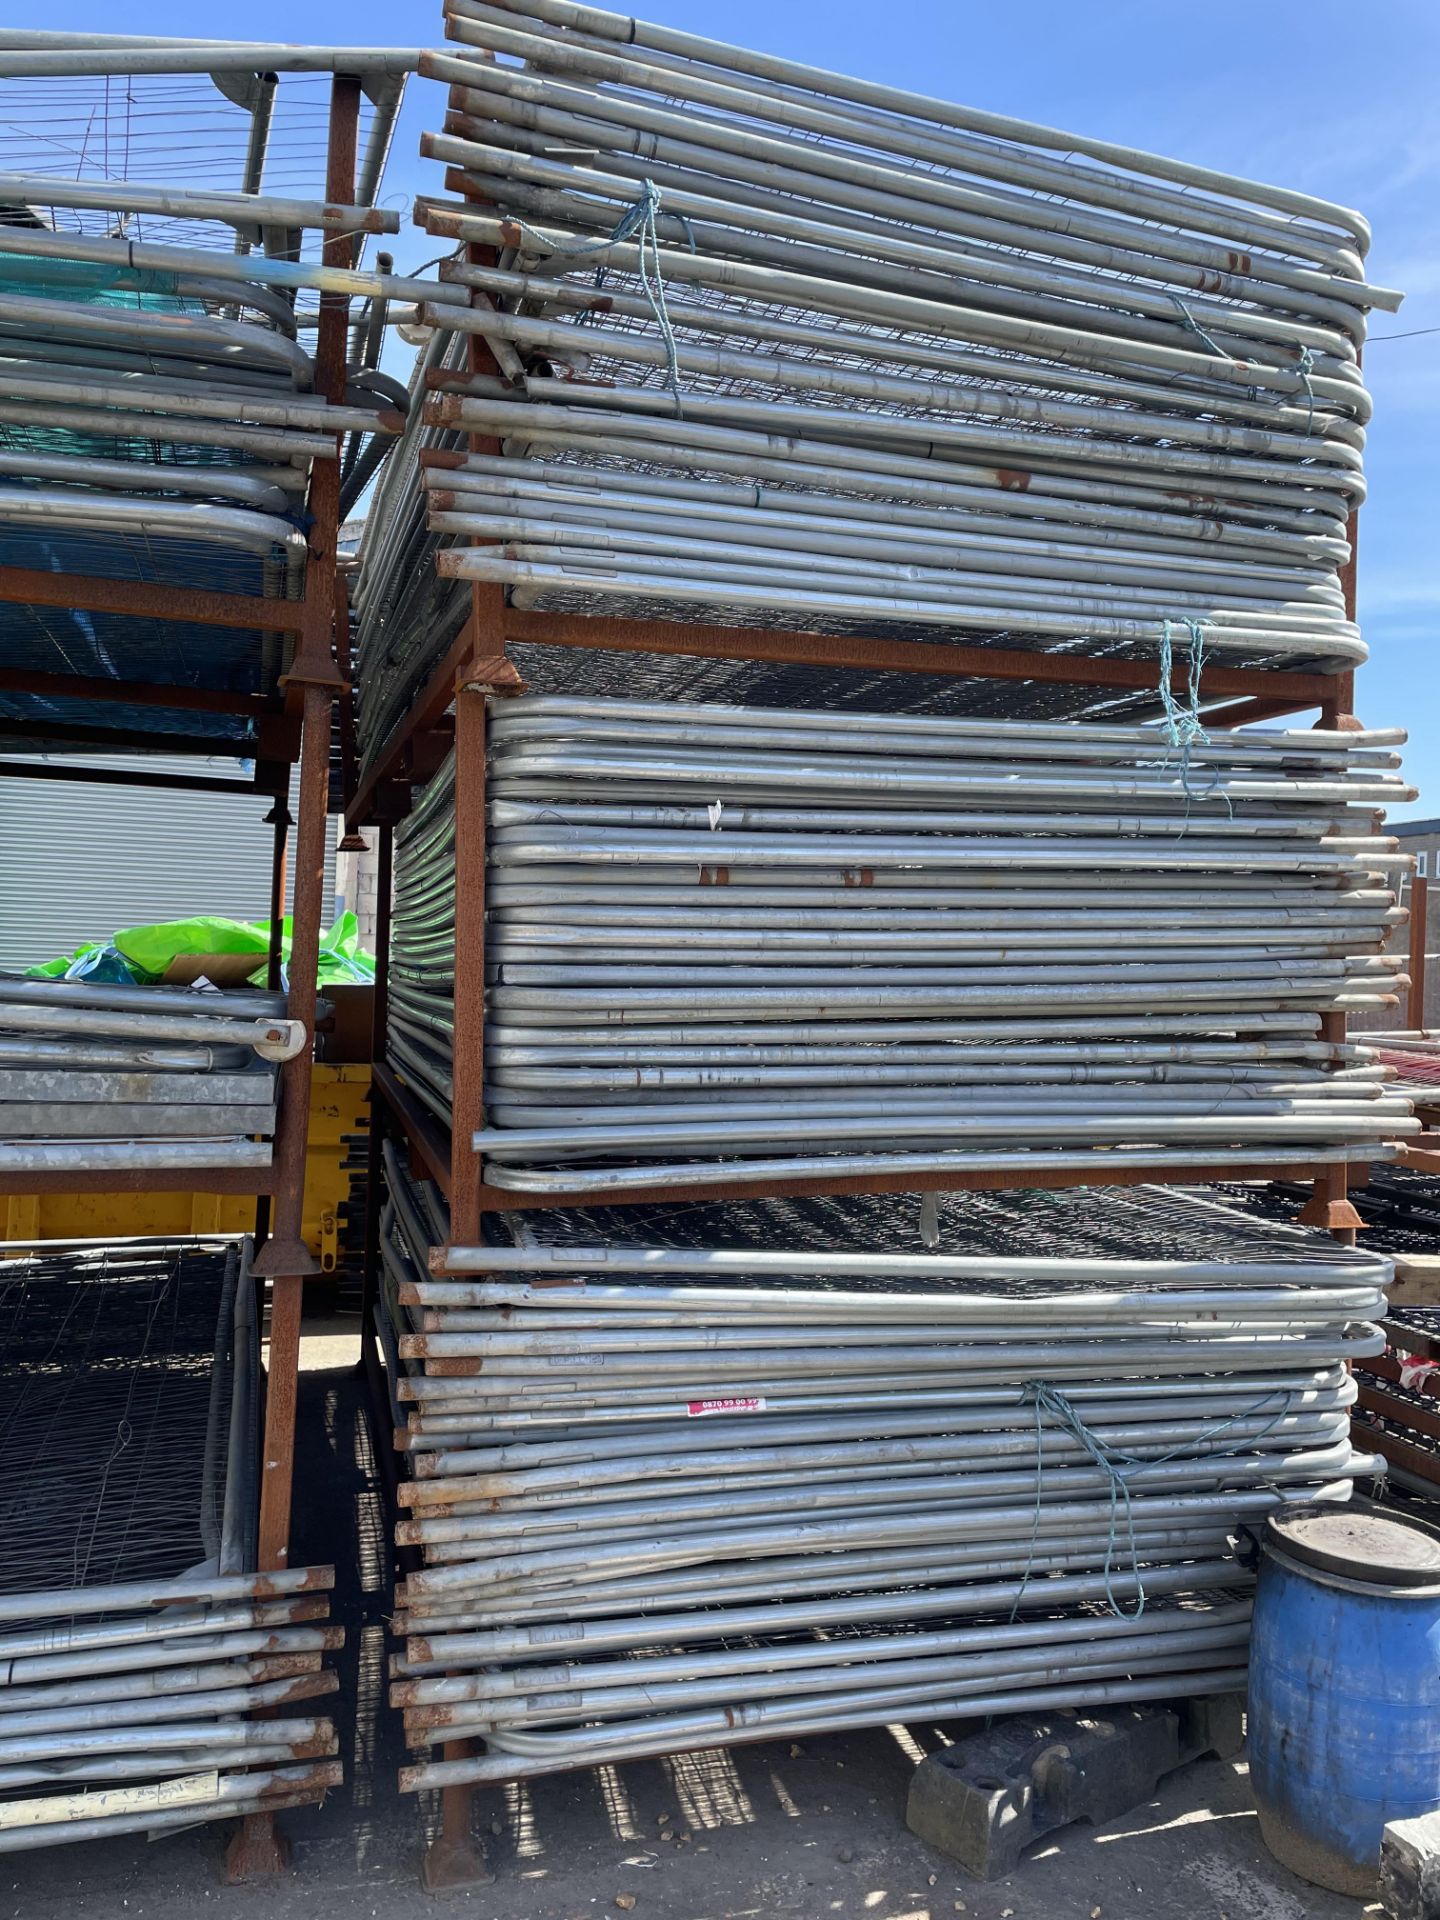 Approximately 200 x Site Fencing Panels w/ A Quantity of Bases - As Pictured - Image 2 of 7